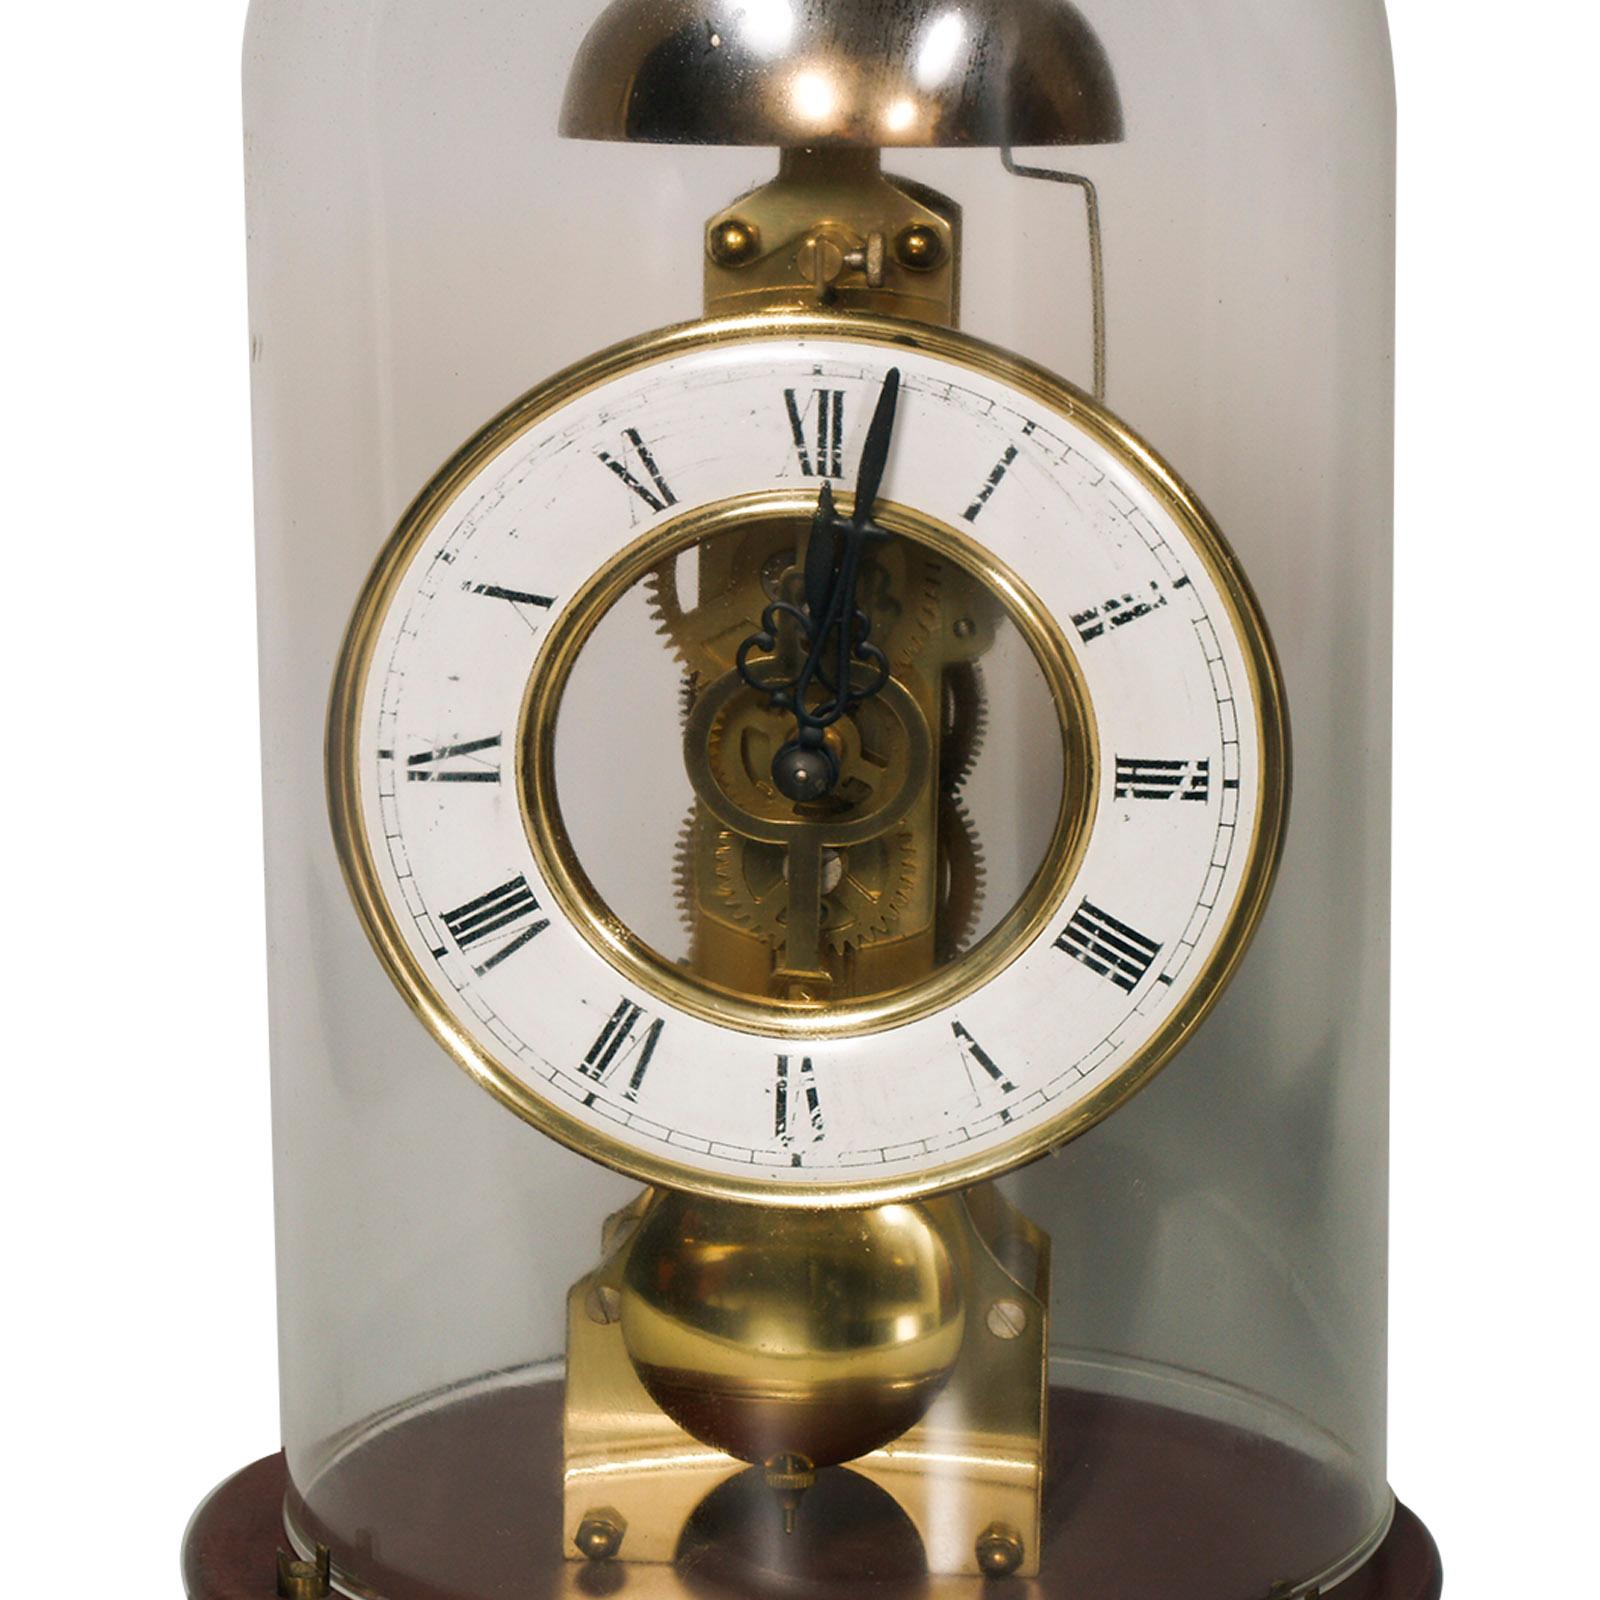 Midcentury German mechanical pendulum table clock with glass by Franz Hermle


About Hermle Clocks
Hermle Clocks (HUM Uhrenmanufaktur GmbH & Co. KG) was founded in 1922 in the Gosheim, Swabian Alb region of Southern Germany by Franz Hermle &